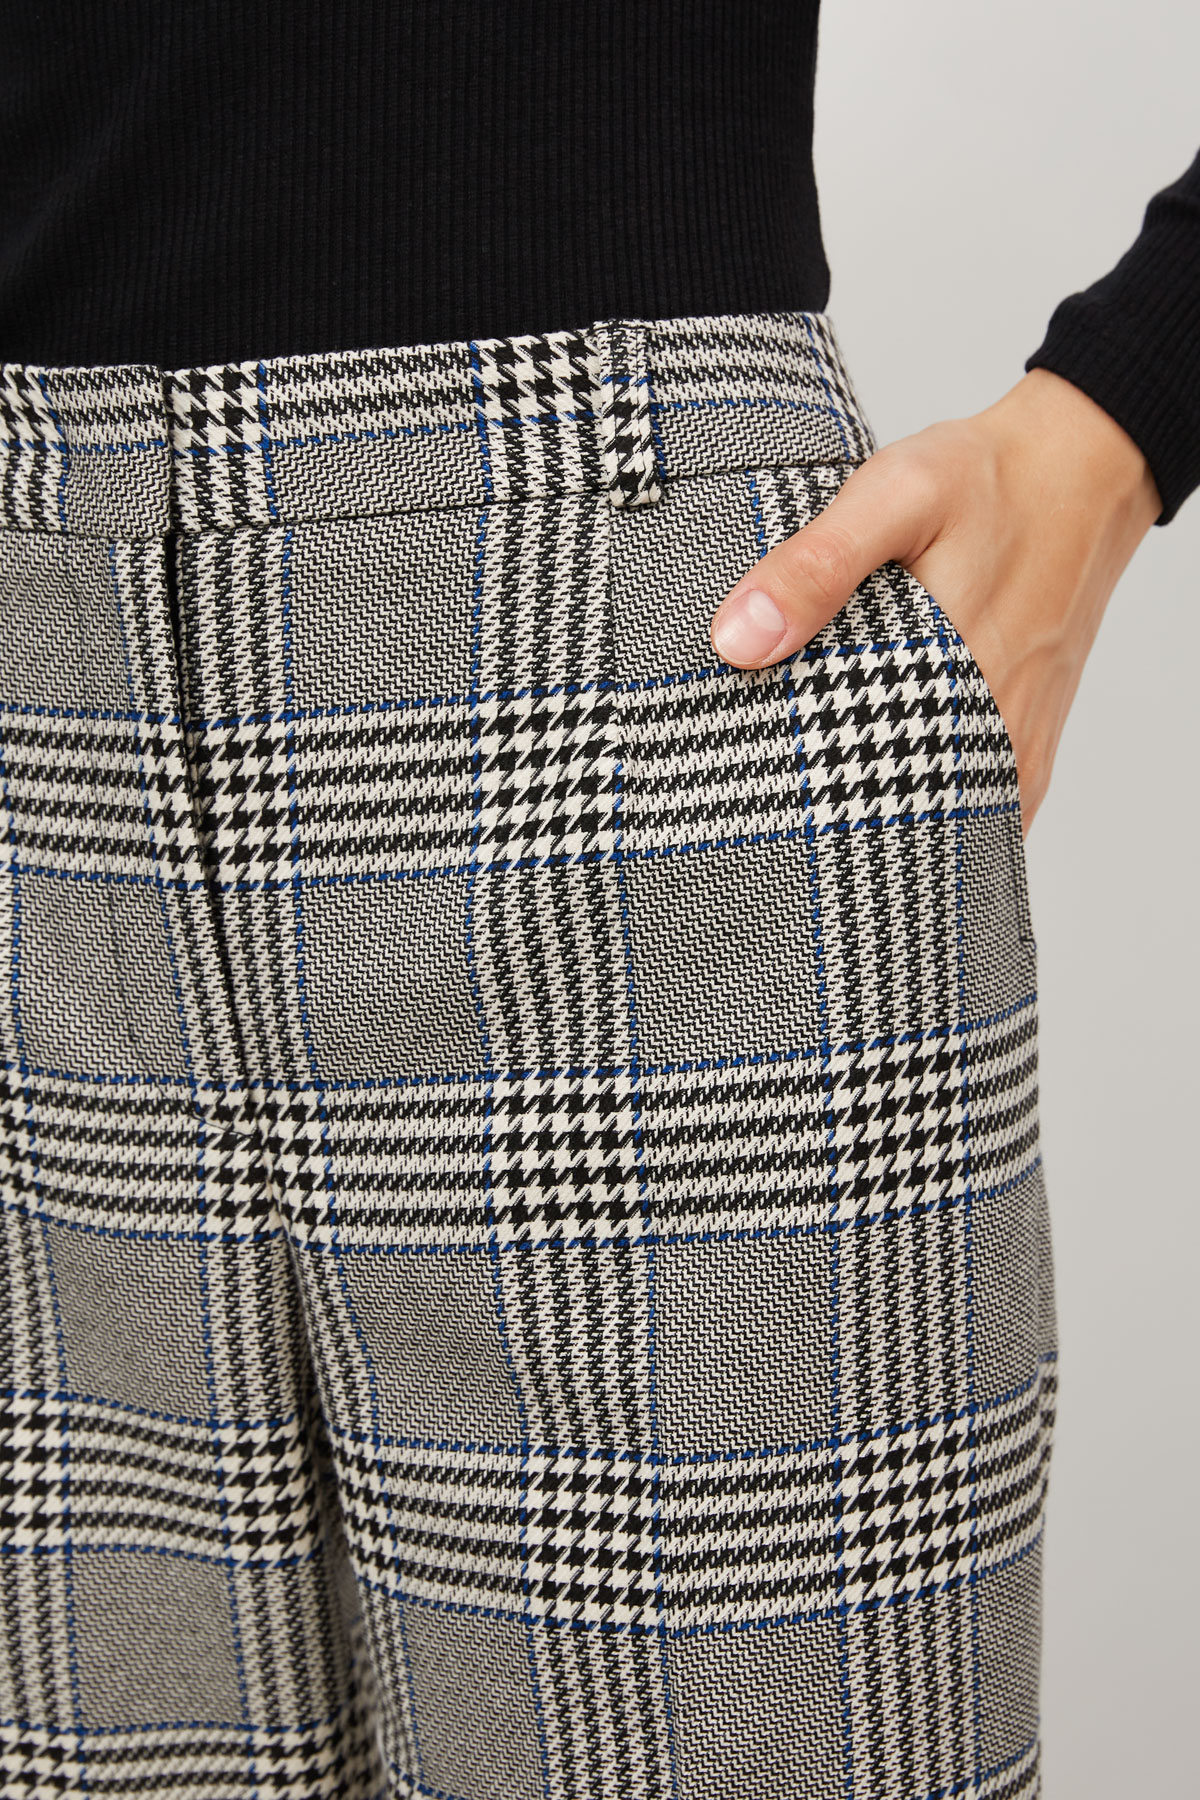 Cropped check trousers, photo 4